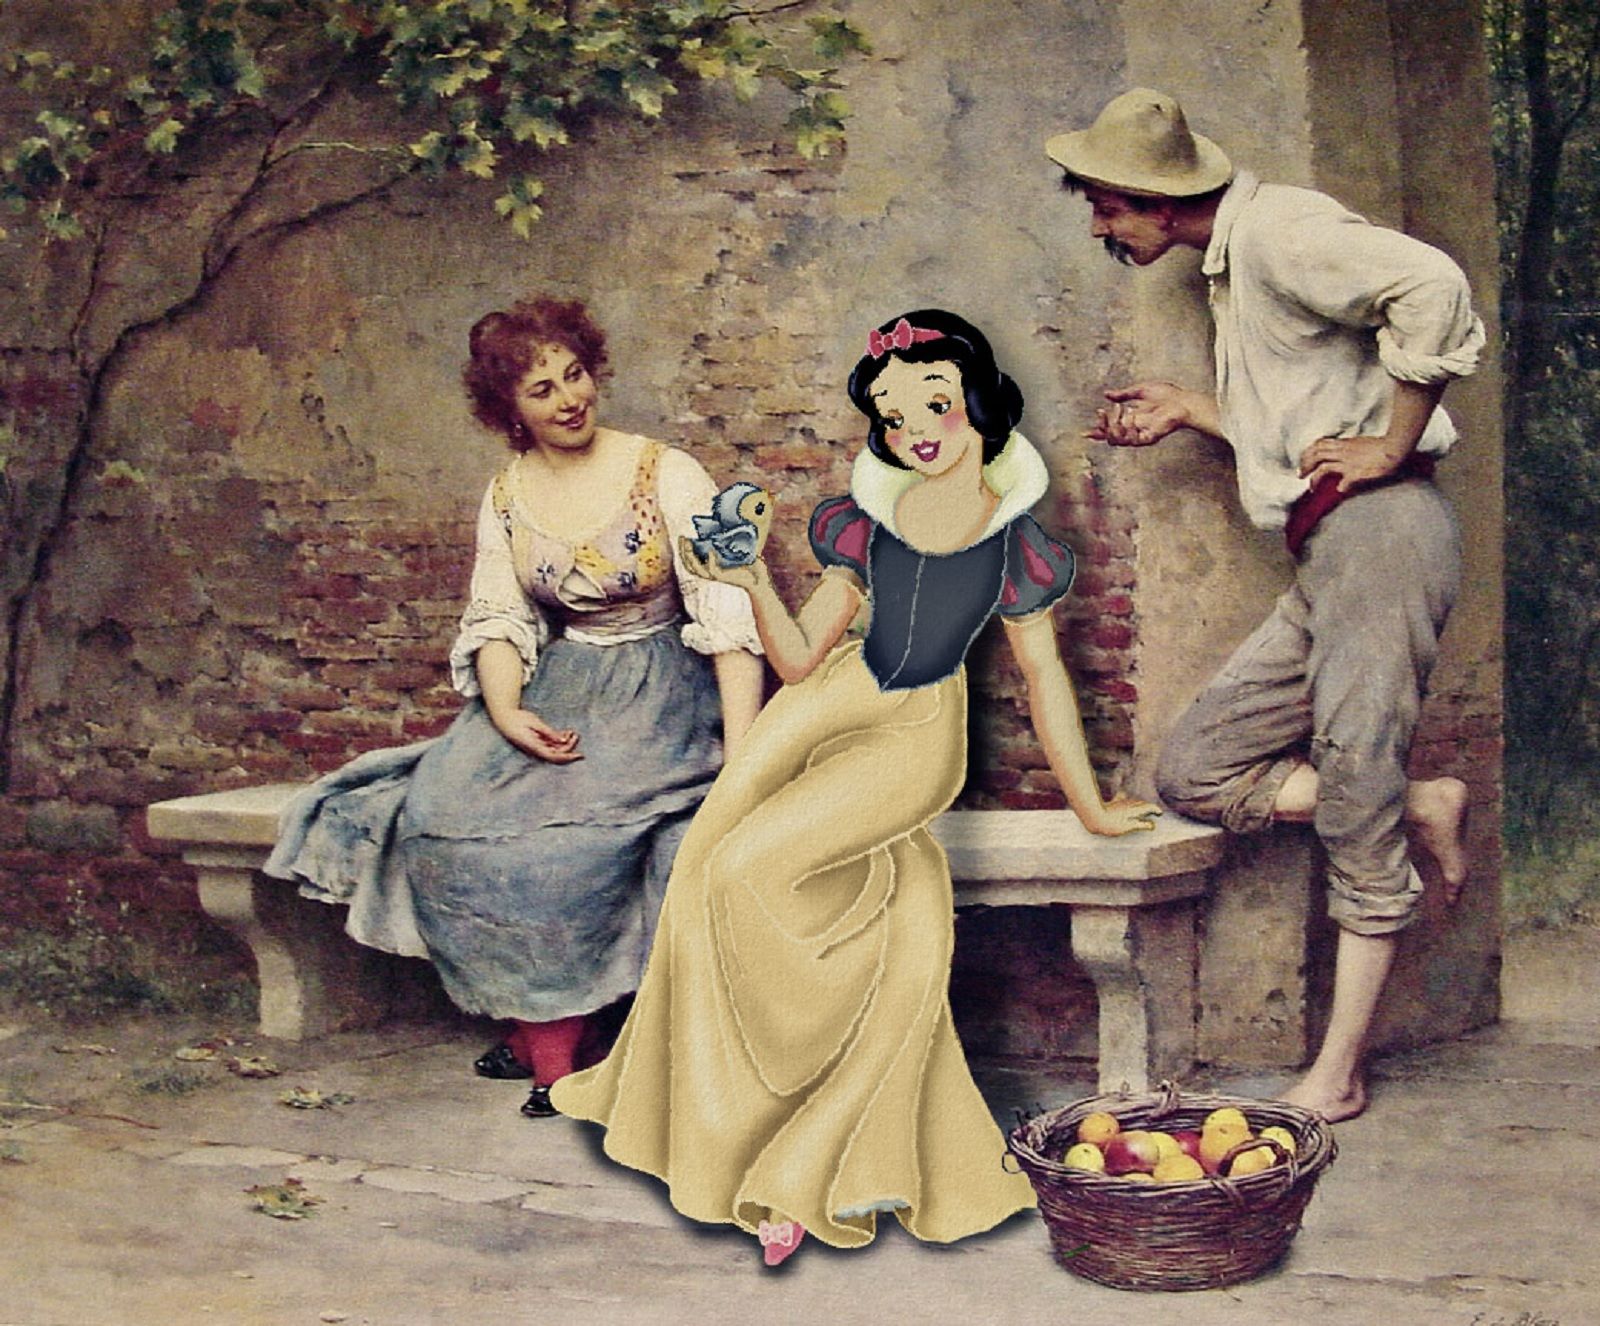 Amusing Images Of Cartoon Characters In Photoshopped Into Renaissance Paintings image 19